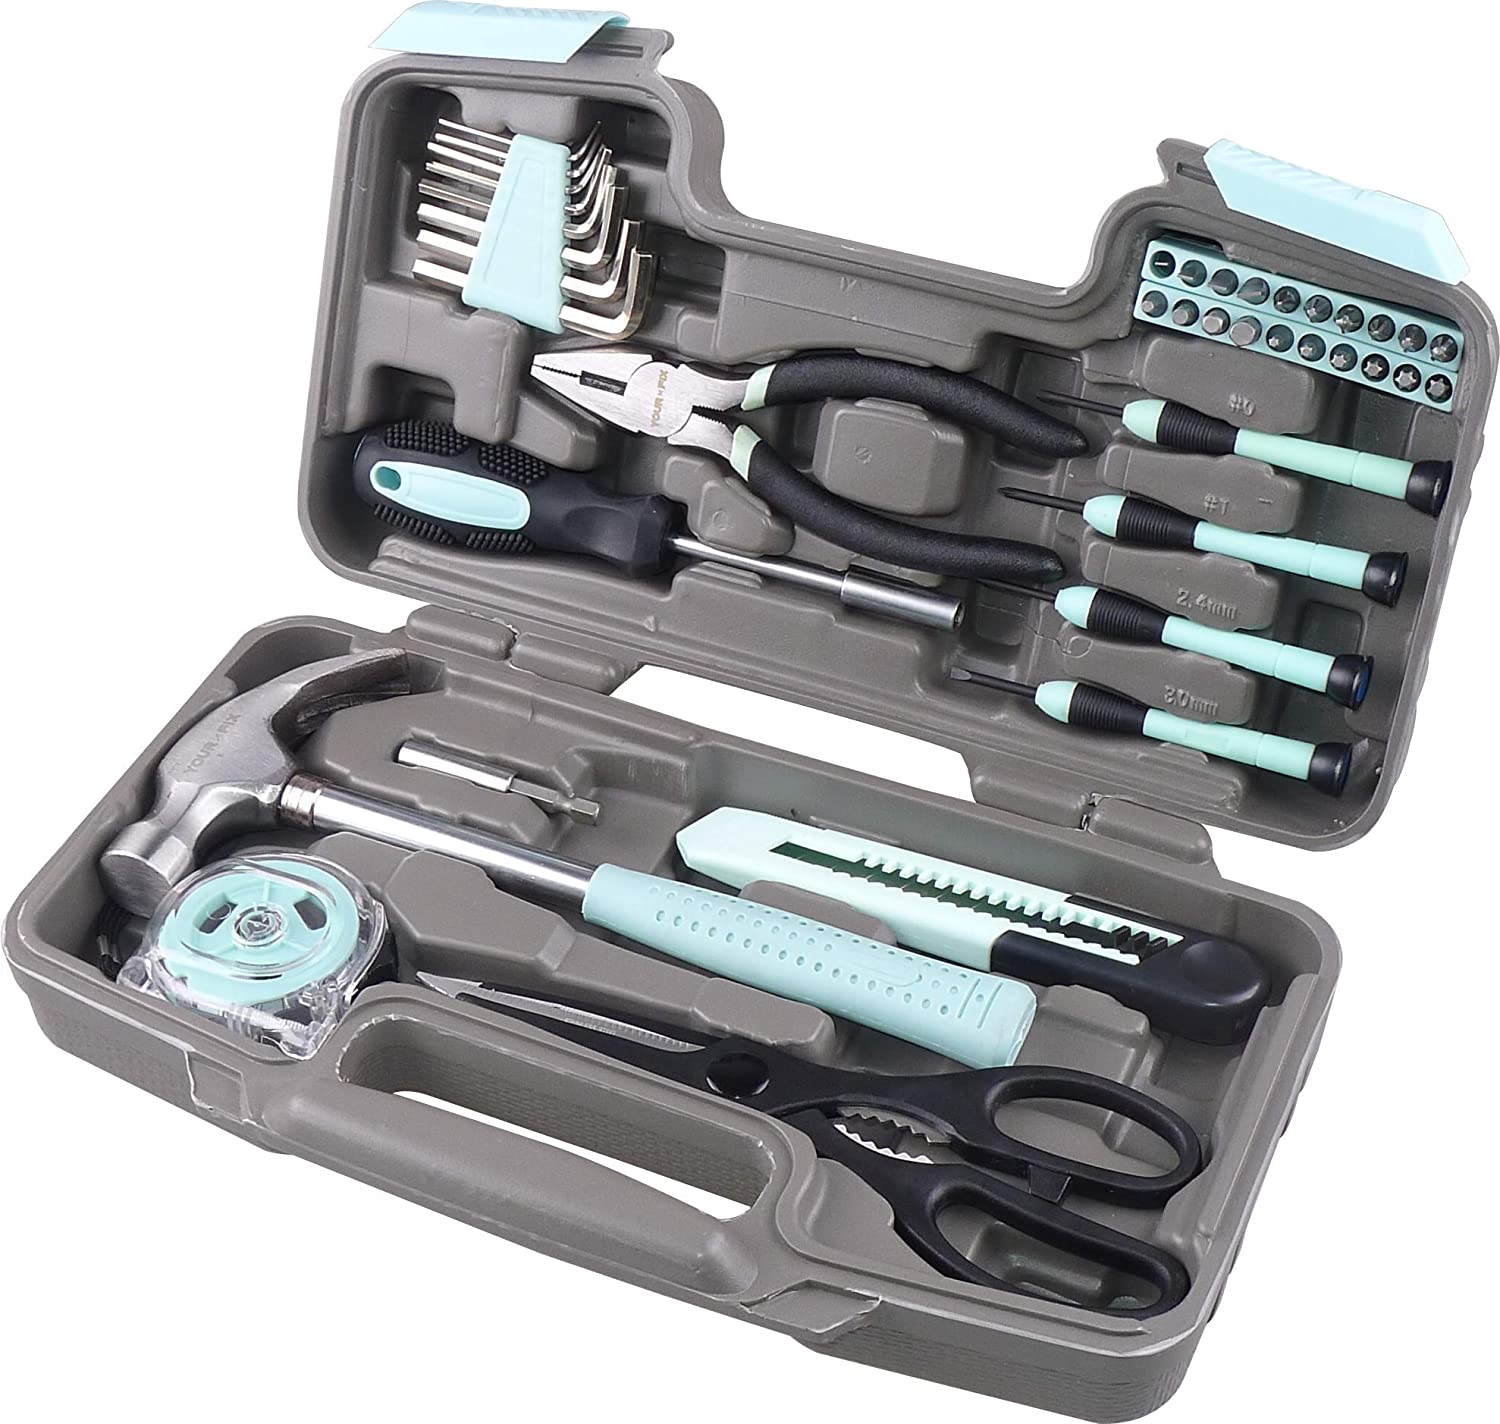 Your Fixx 39-Piece Tool Kit -General Home Improvement & Repair Tool Set with Plastic Hard Case Storage Carrier